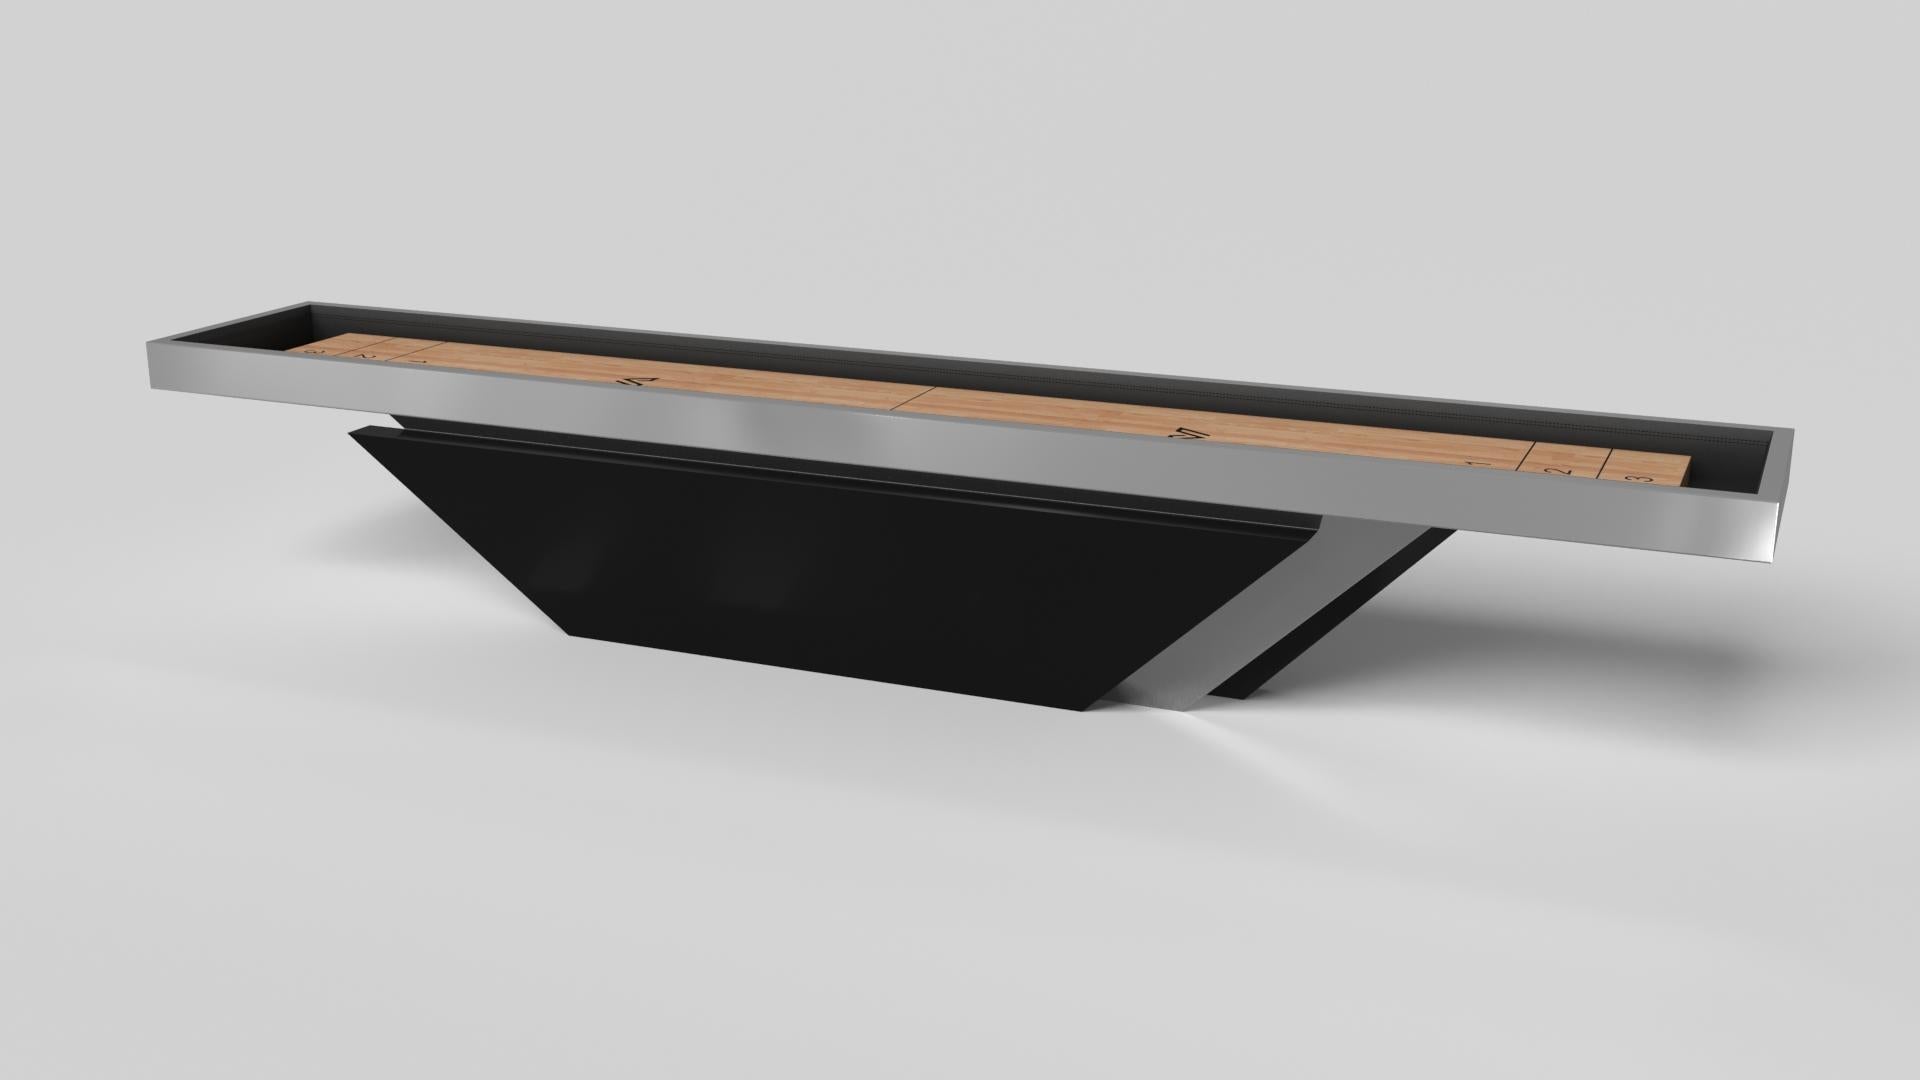 Handcrafted with clean lines, sharp angles, and a pyramid base, the Vogue shuffleboard table in chrome with black strikes the perfect balance between sport-inspired style and contemporary design. Timeless in its appeal and revered for its